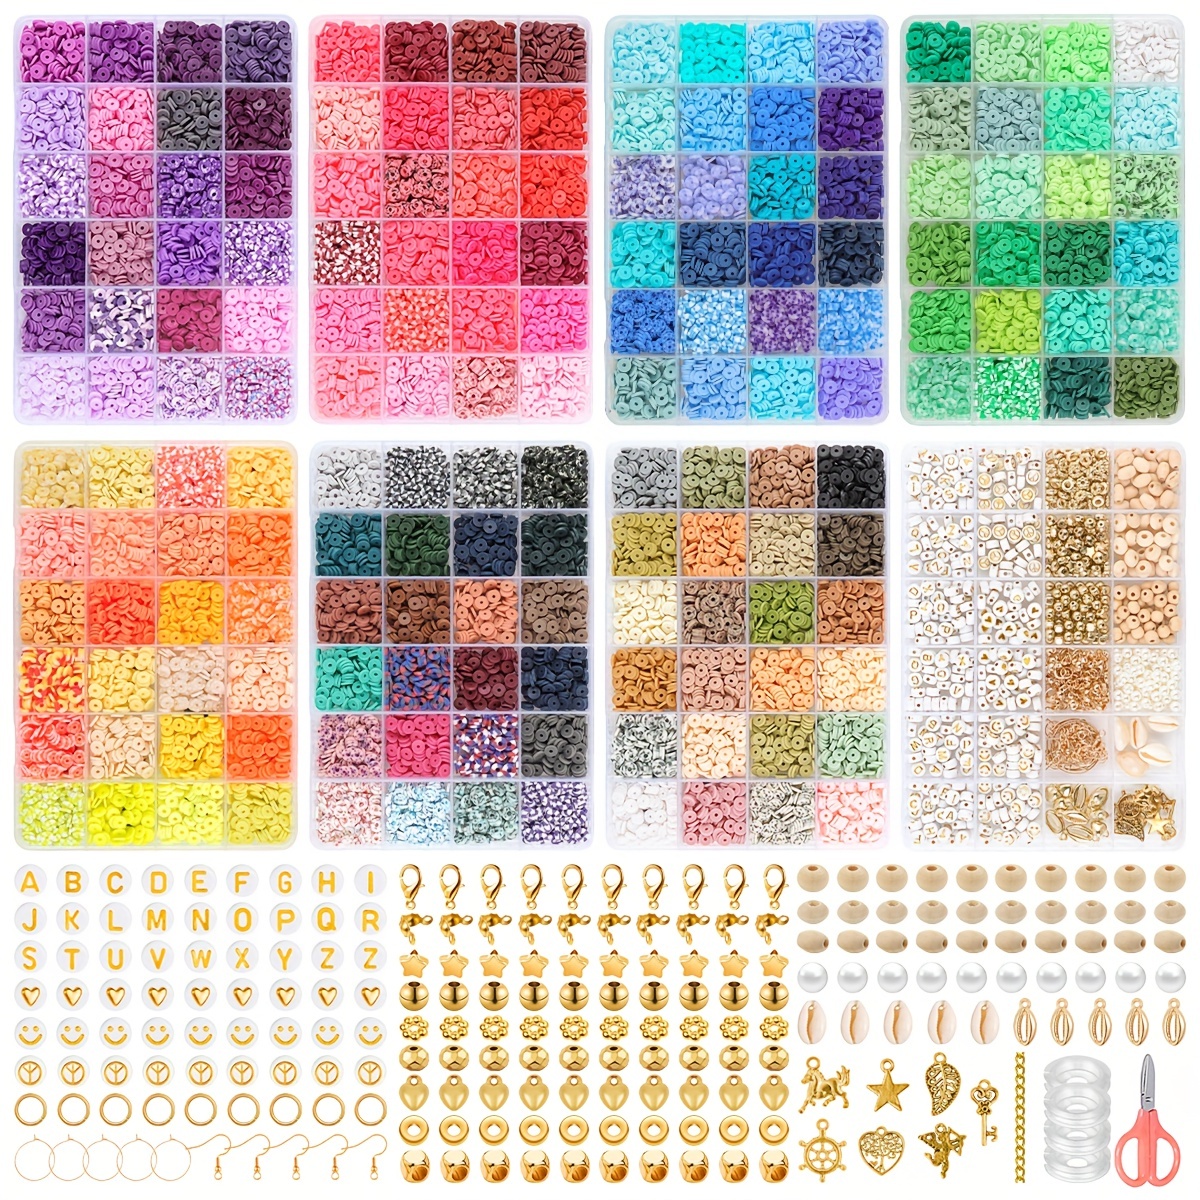 6MM Glass Beads 1400Pcs for Jewelry Making 28 Colors Round Gemstone Crystal  Beads Bracelet Making Kit Loose Beads with 2 Rolls Crystal Elastic Thread